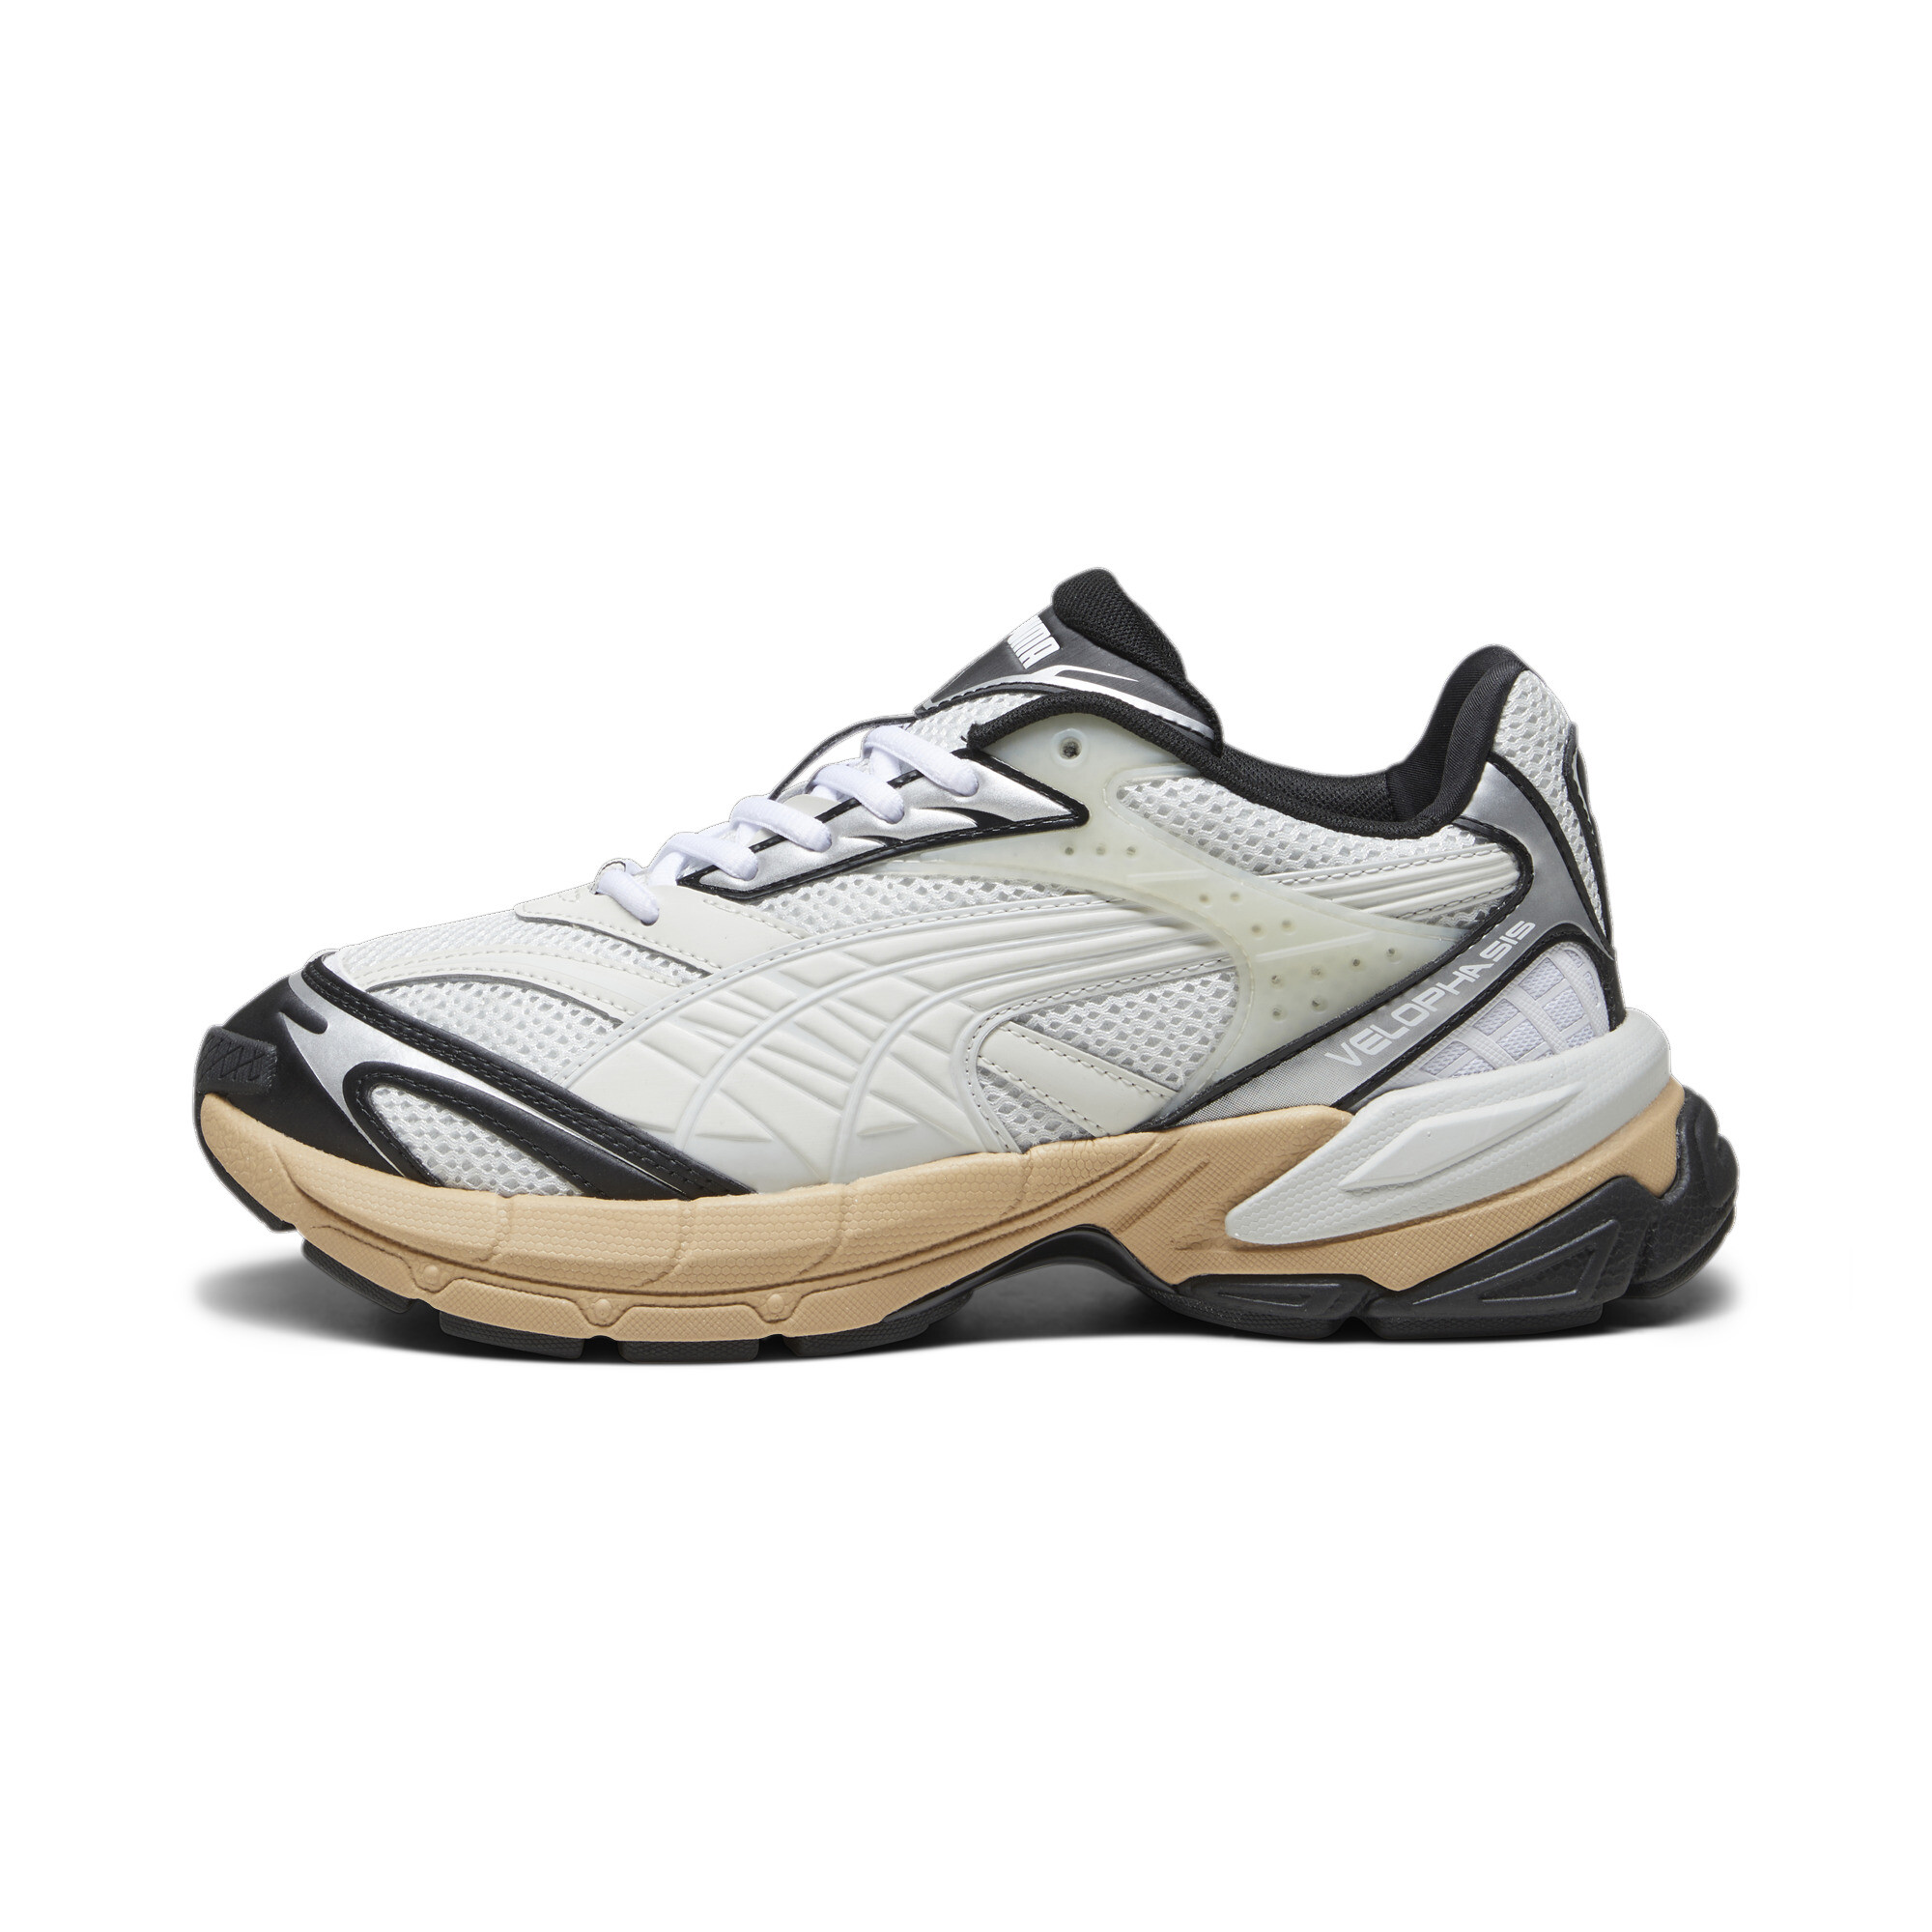 Puma Velophasis Technisch Sneakers, Gray, Size 39, Shoes